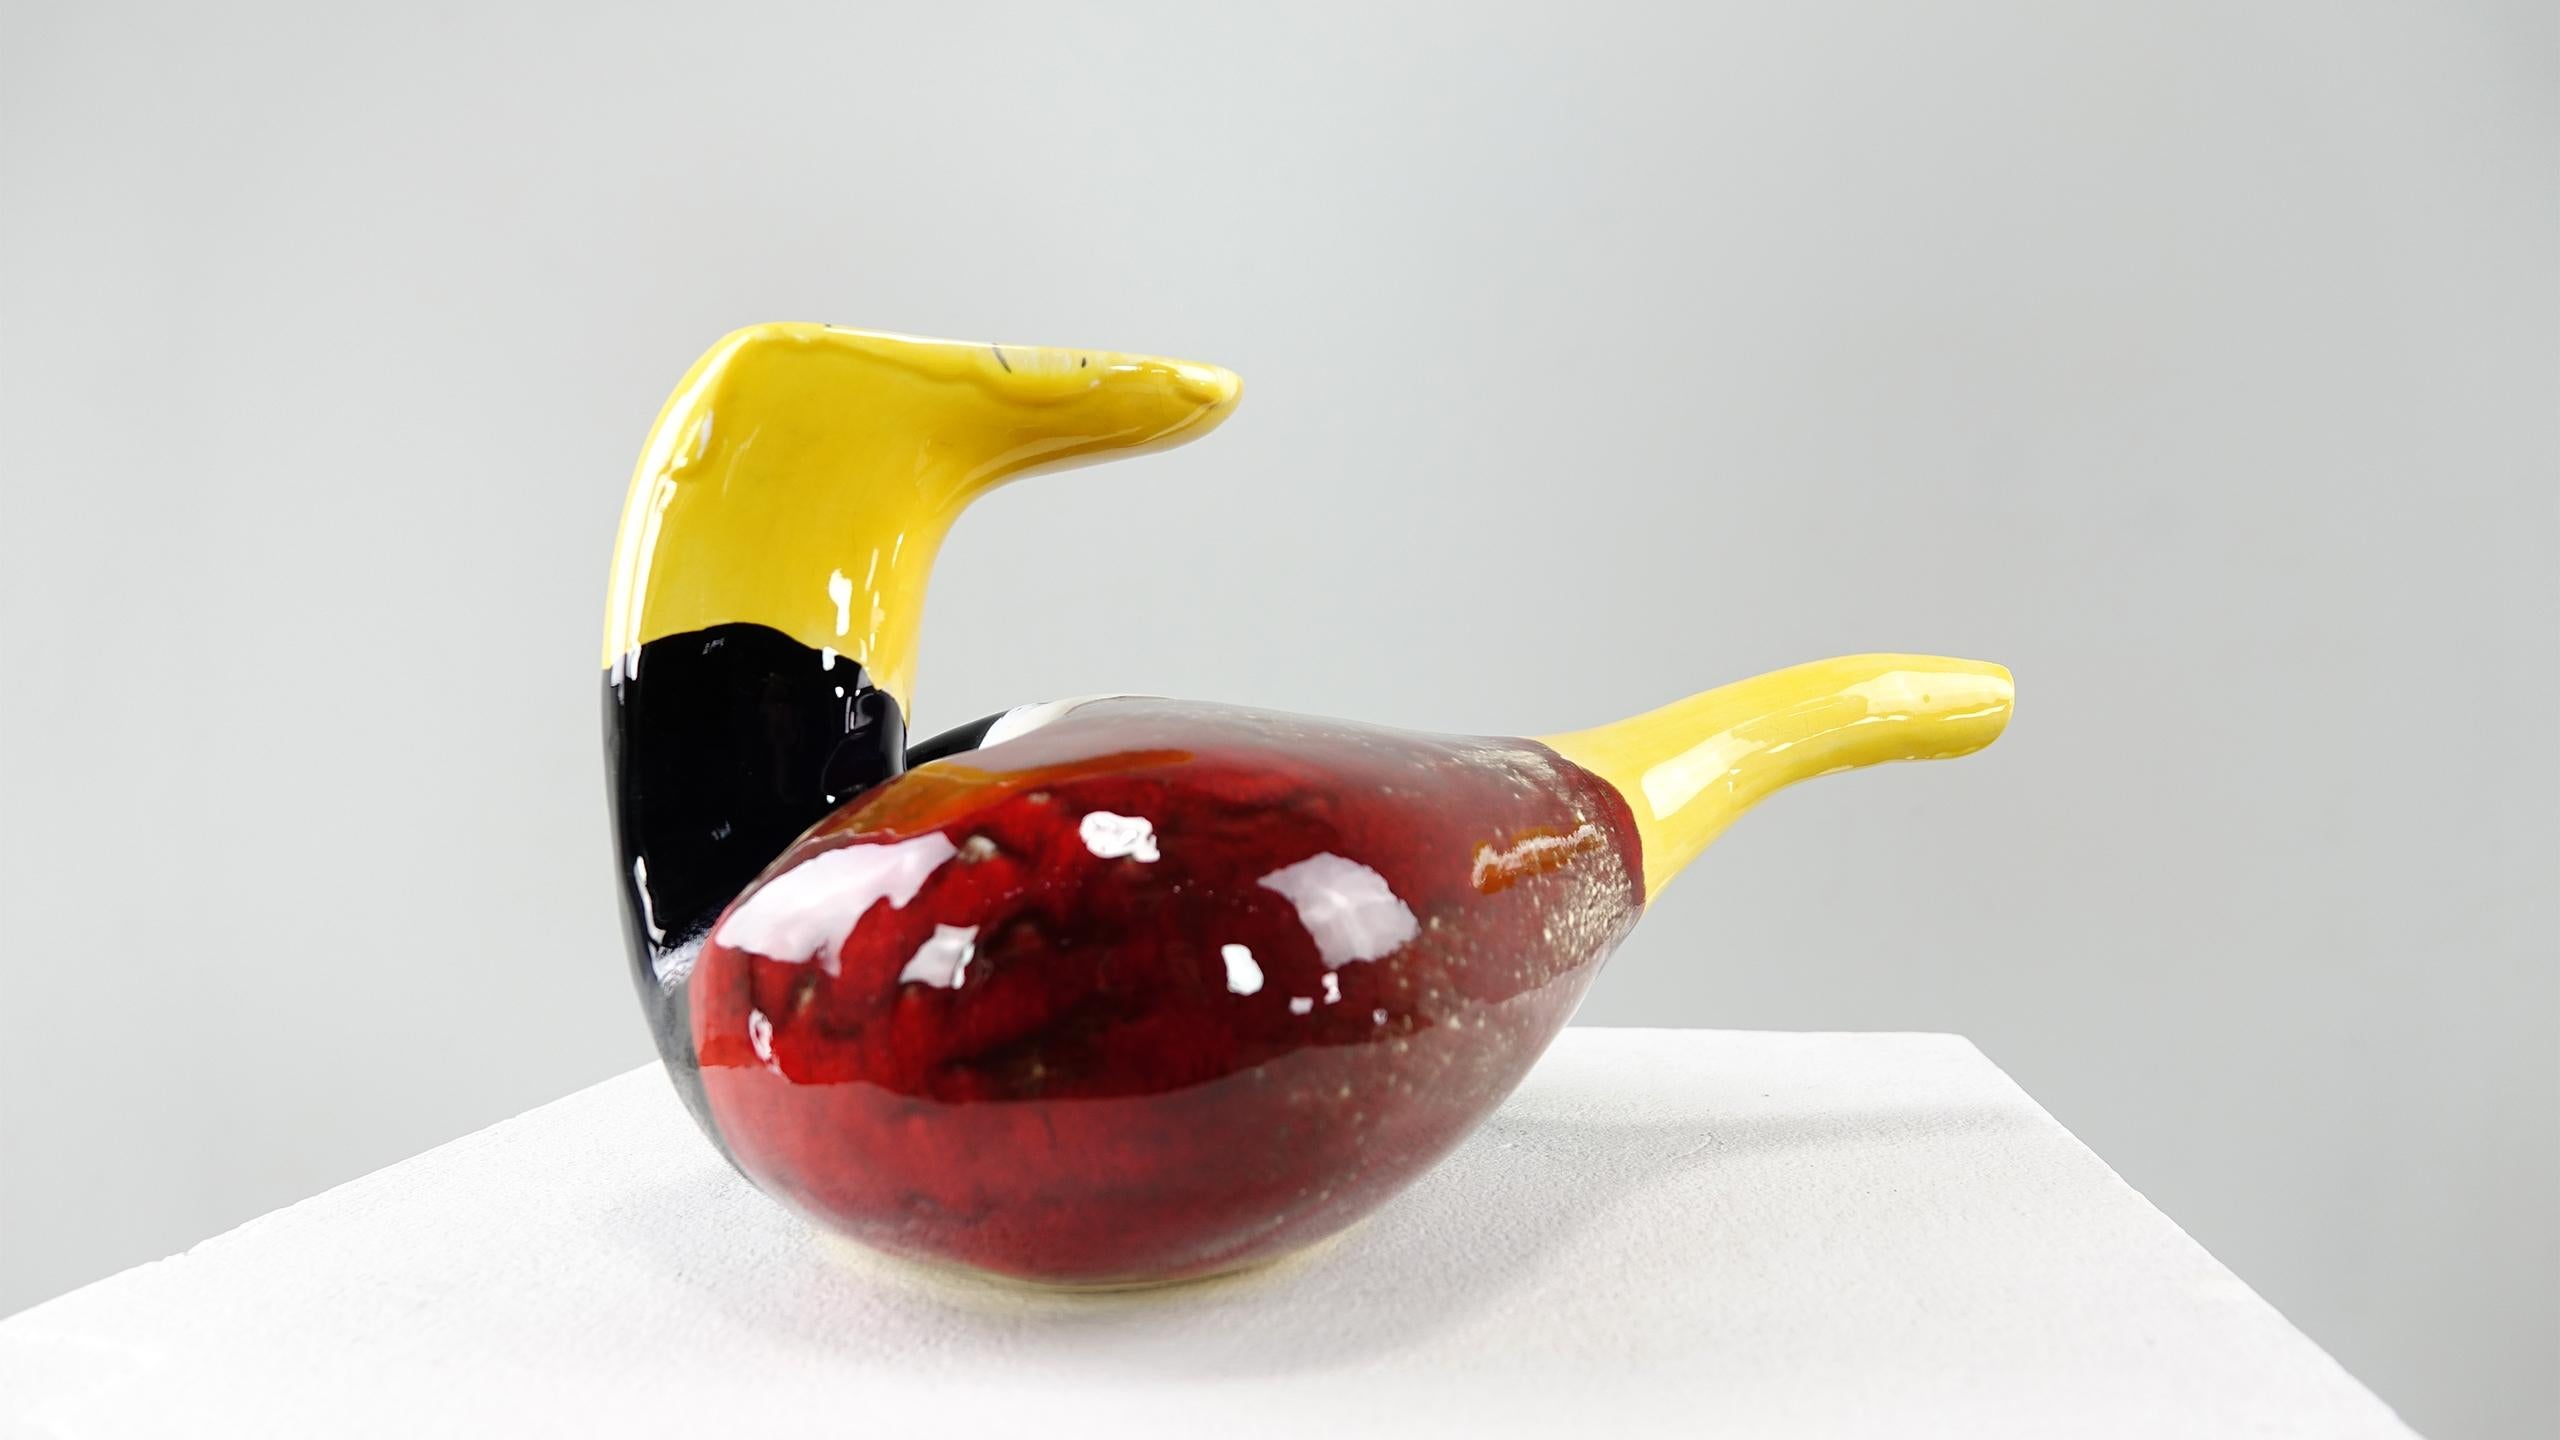 Designed by Luigi Colani 1969, multicolored glazed. (DR) From a small experimental series of different models with different colours and glazes, which later led to the Rosenthal series model 